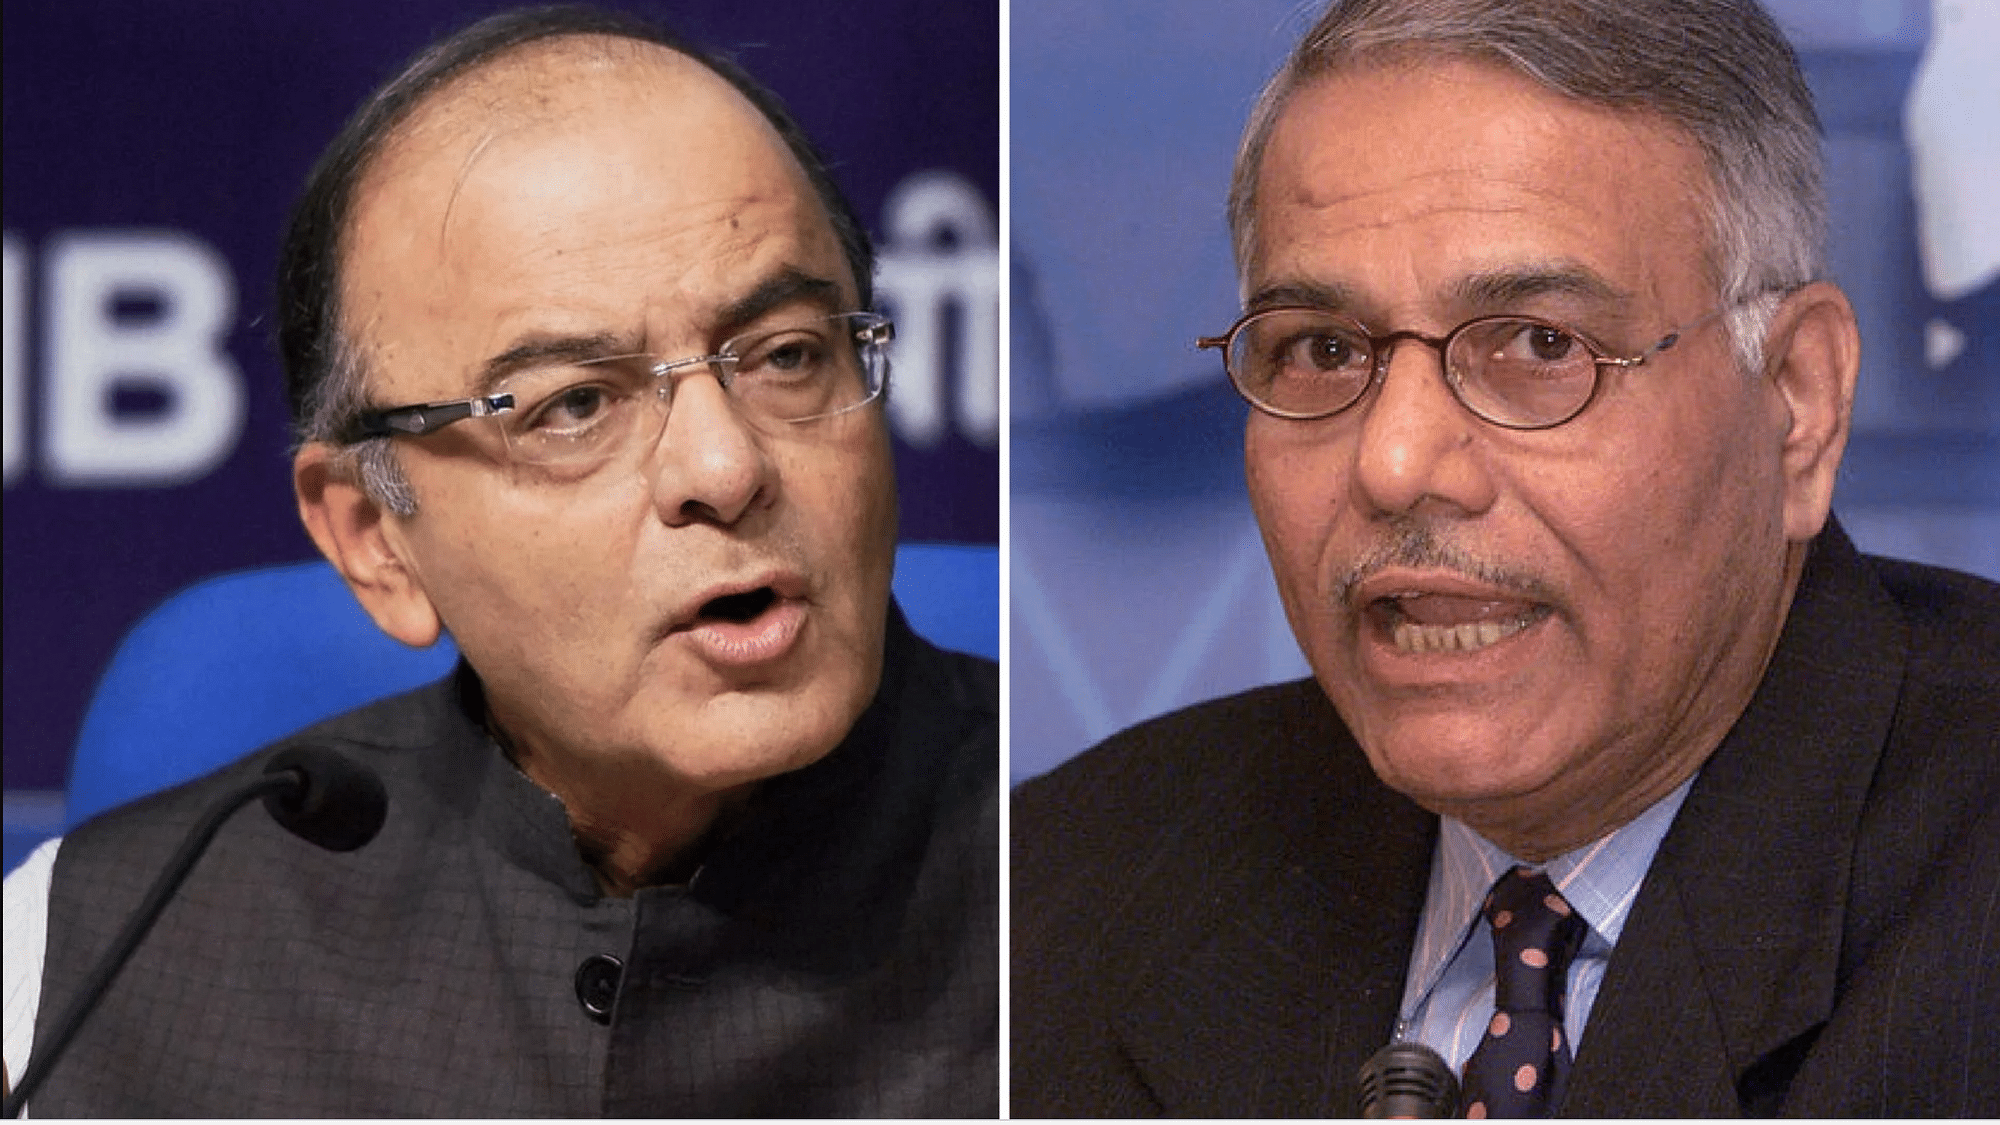 Yashwant Sinha took a few digs at Prime Minister Narendra Modi and Finance Minister Arun Jaitley.